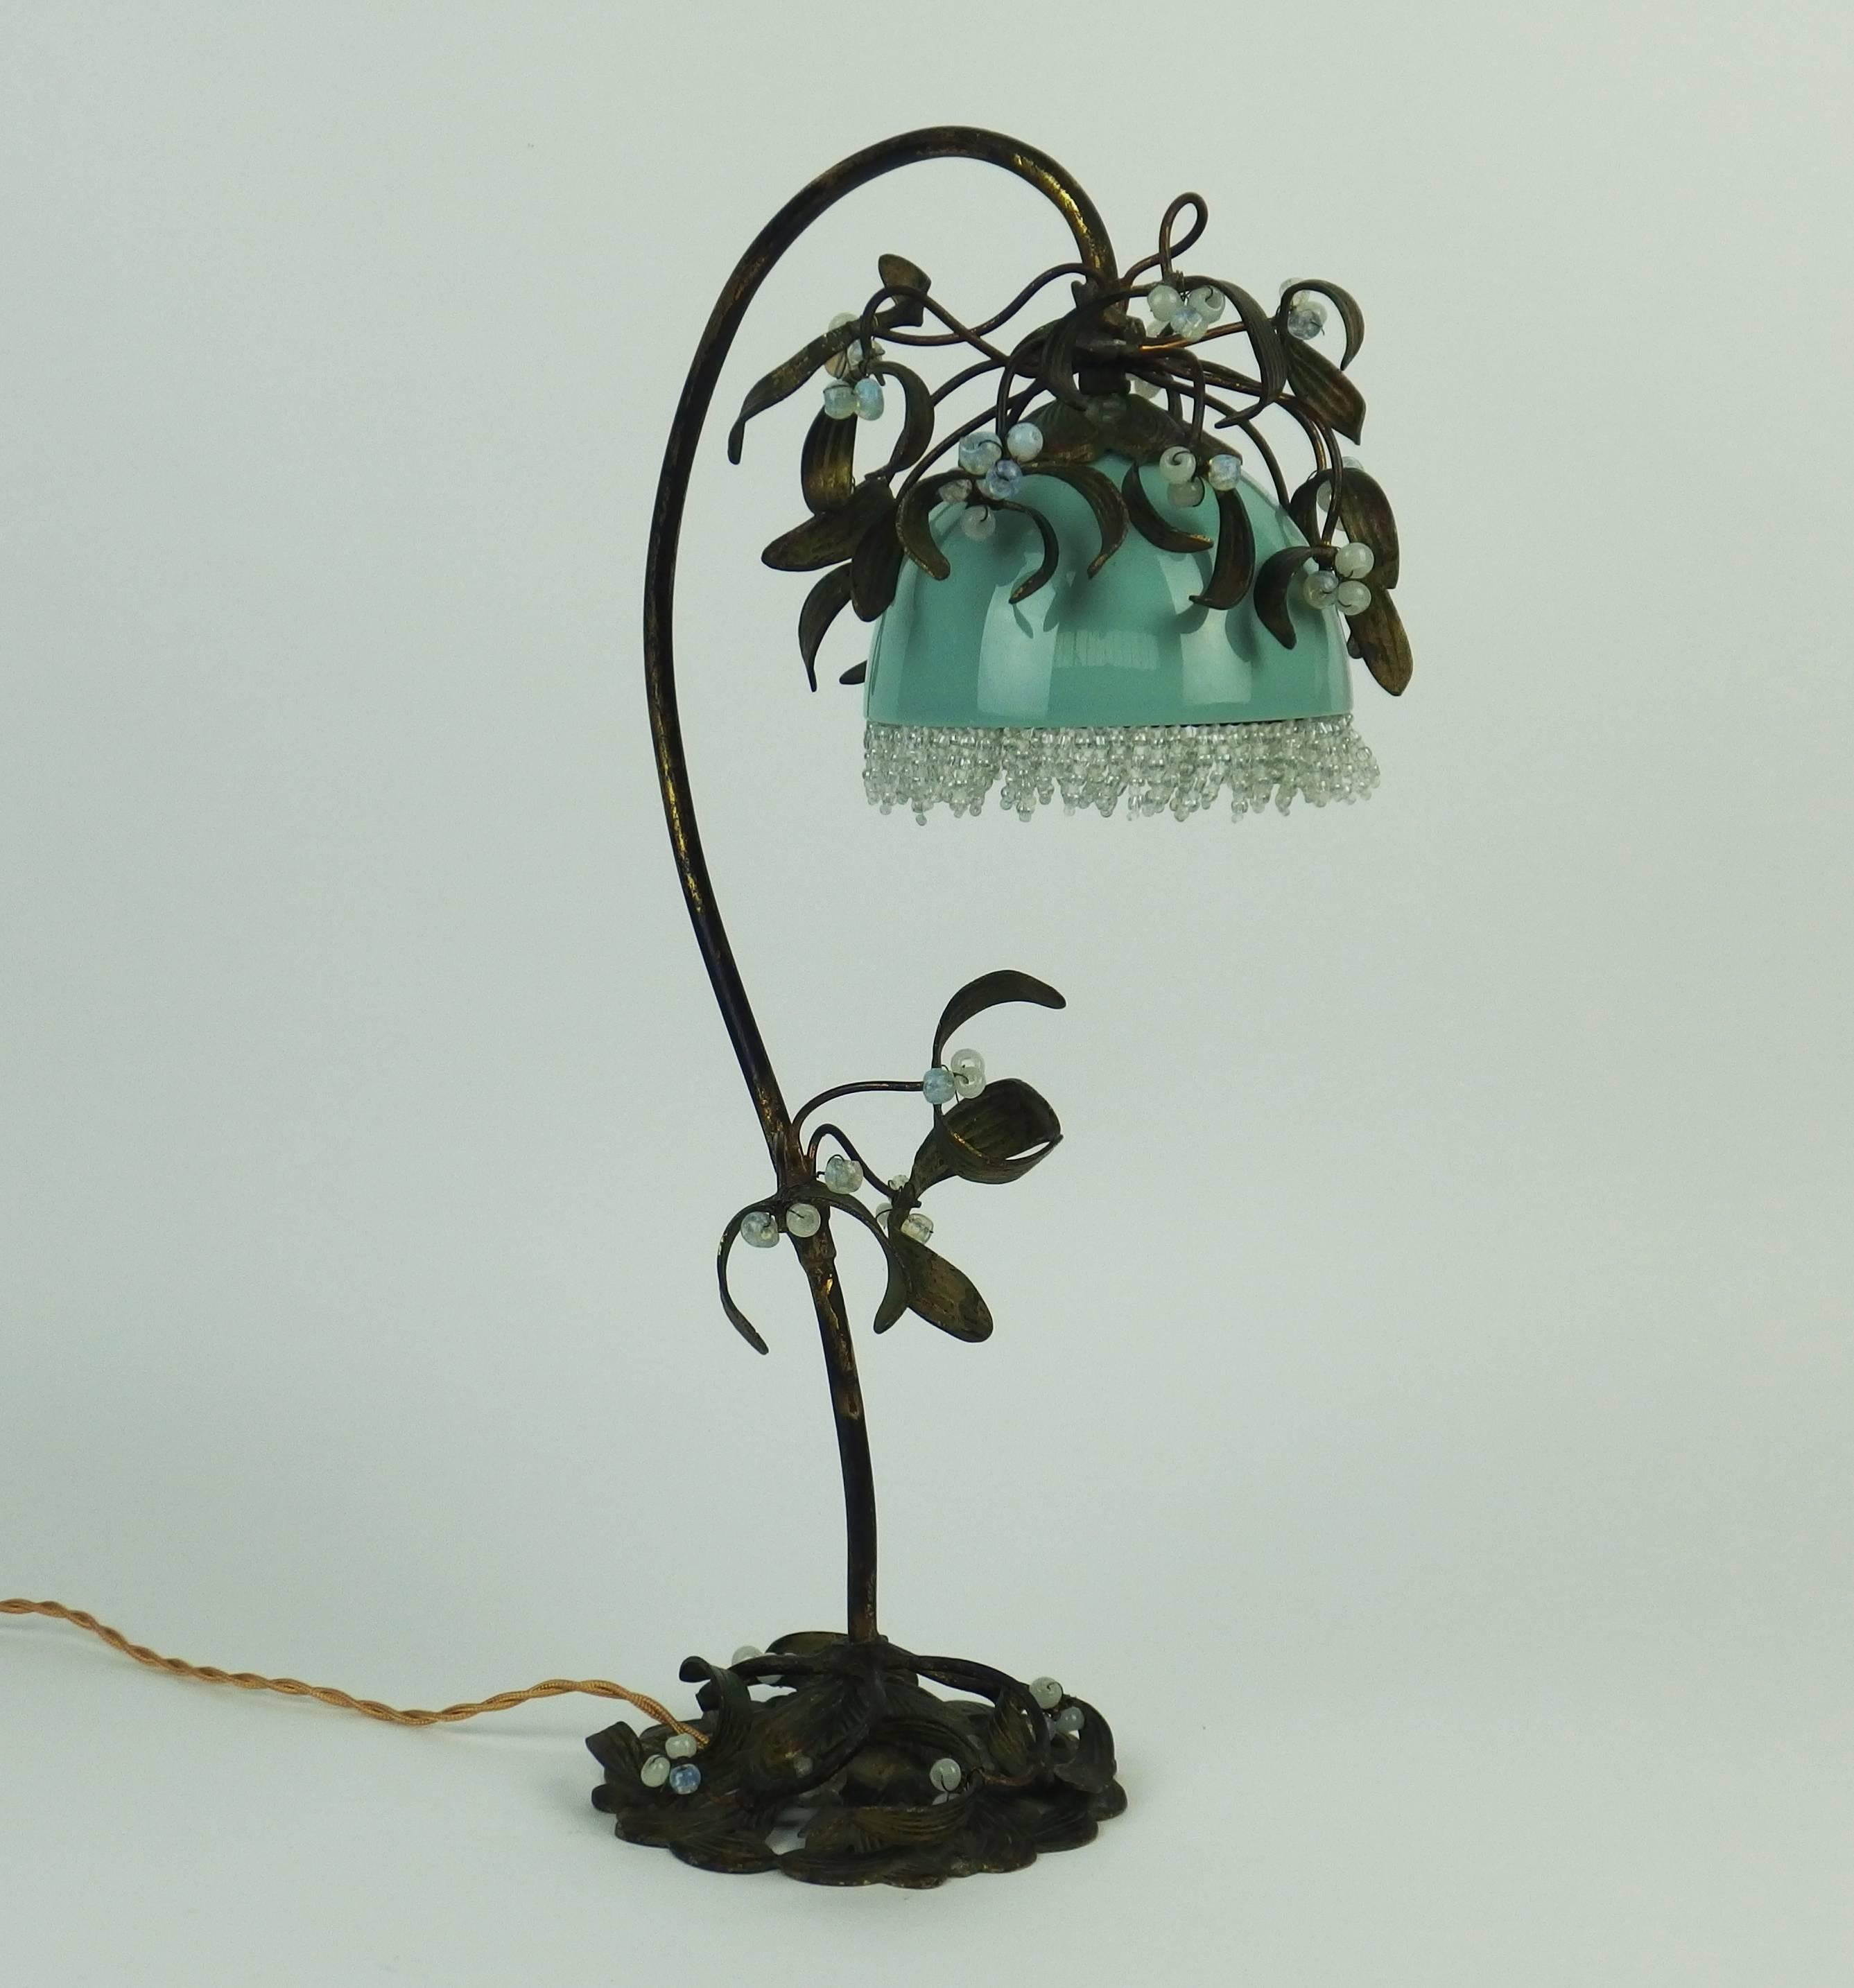 A rare brass and bronze mistletoe table lamp with green painted brass and bronze, small white pearls and a green glass shade.